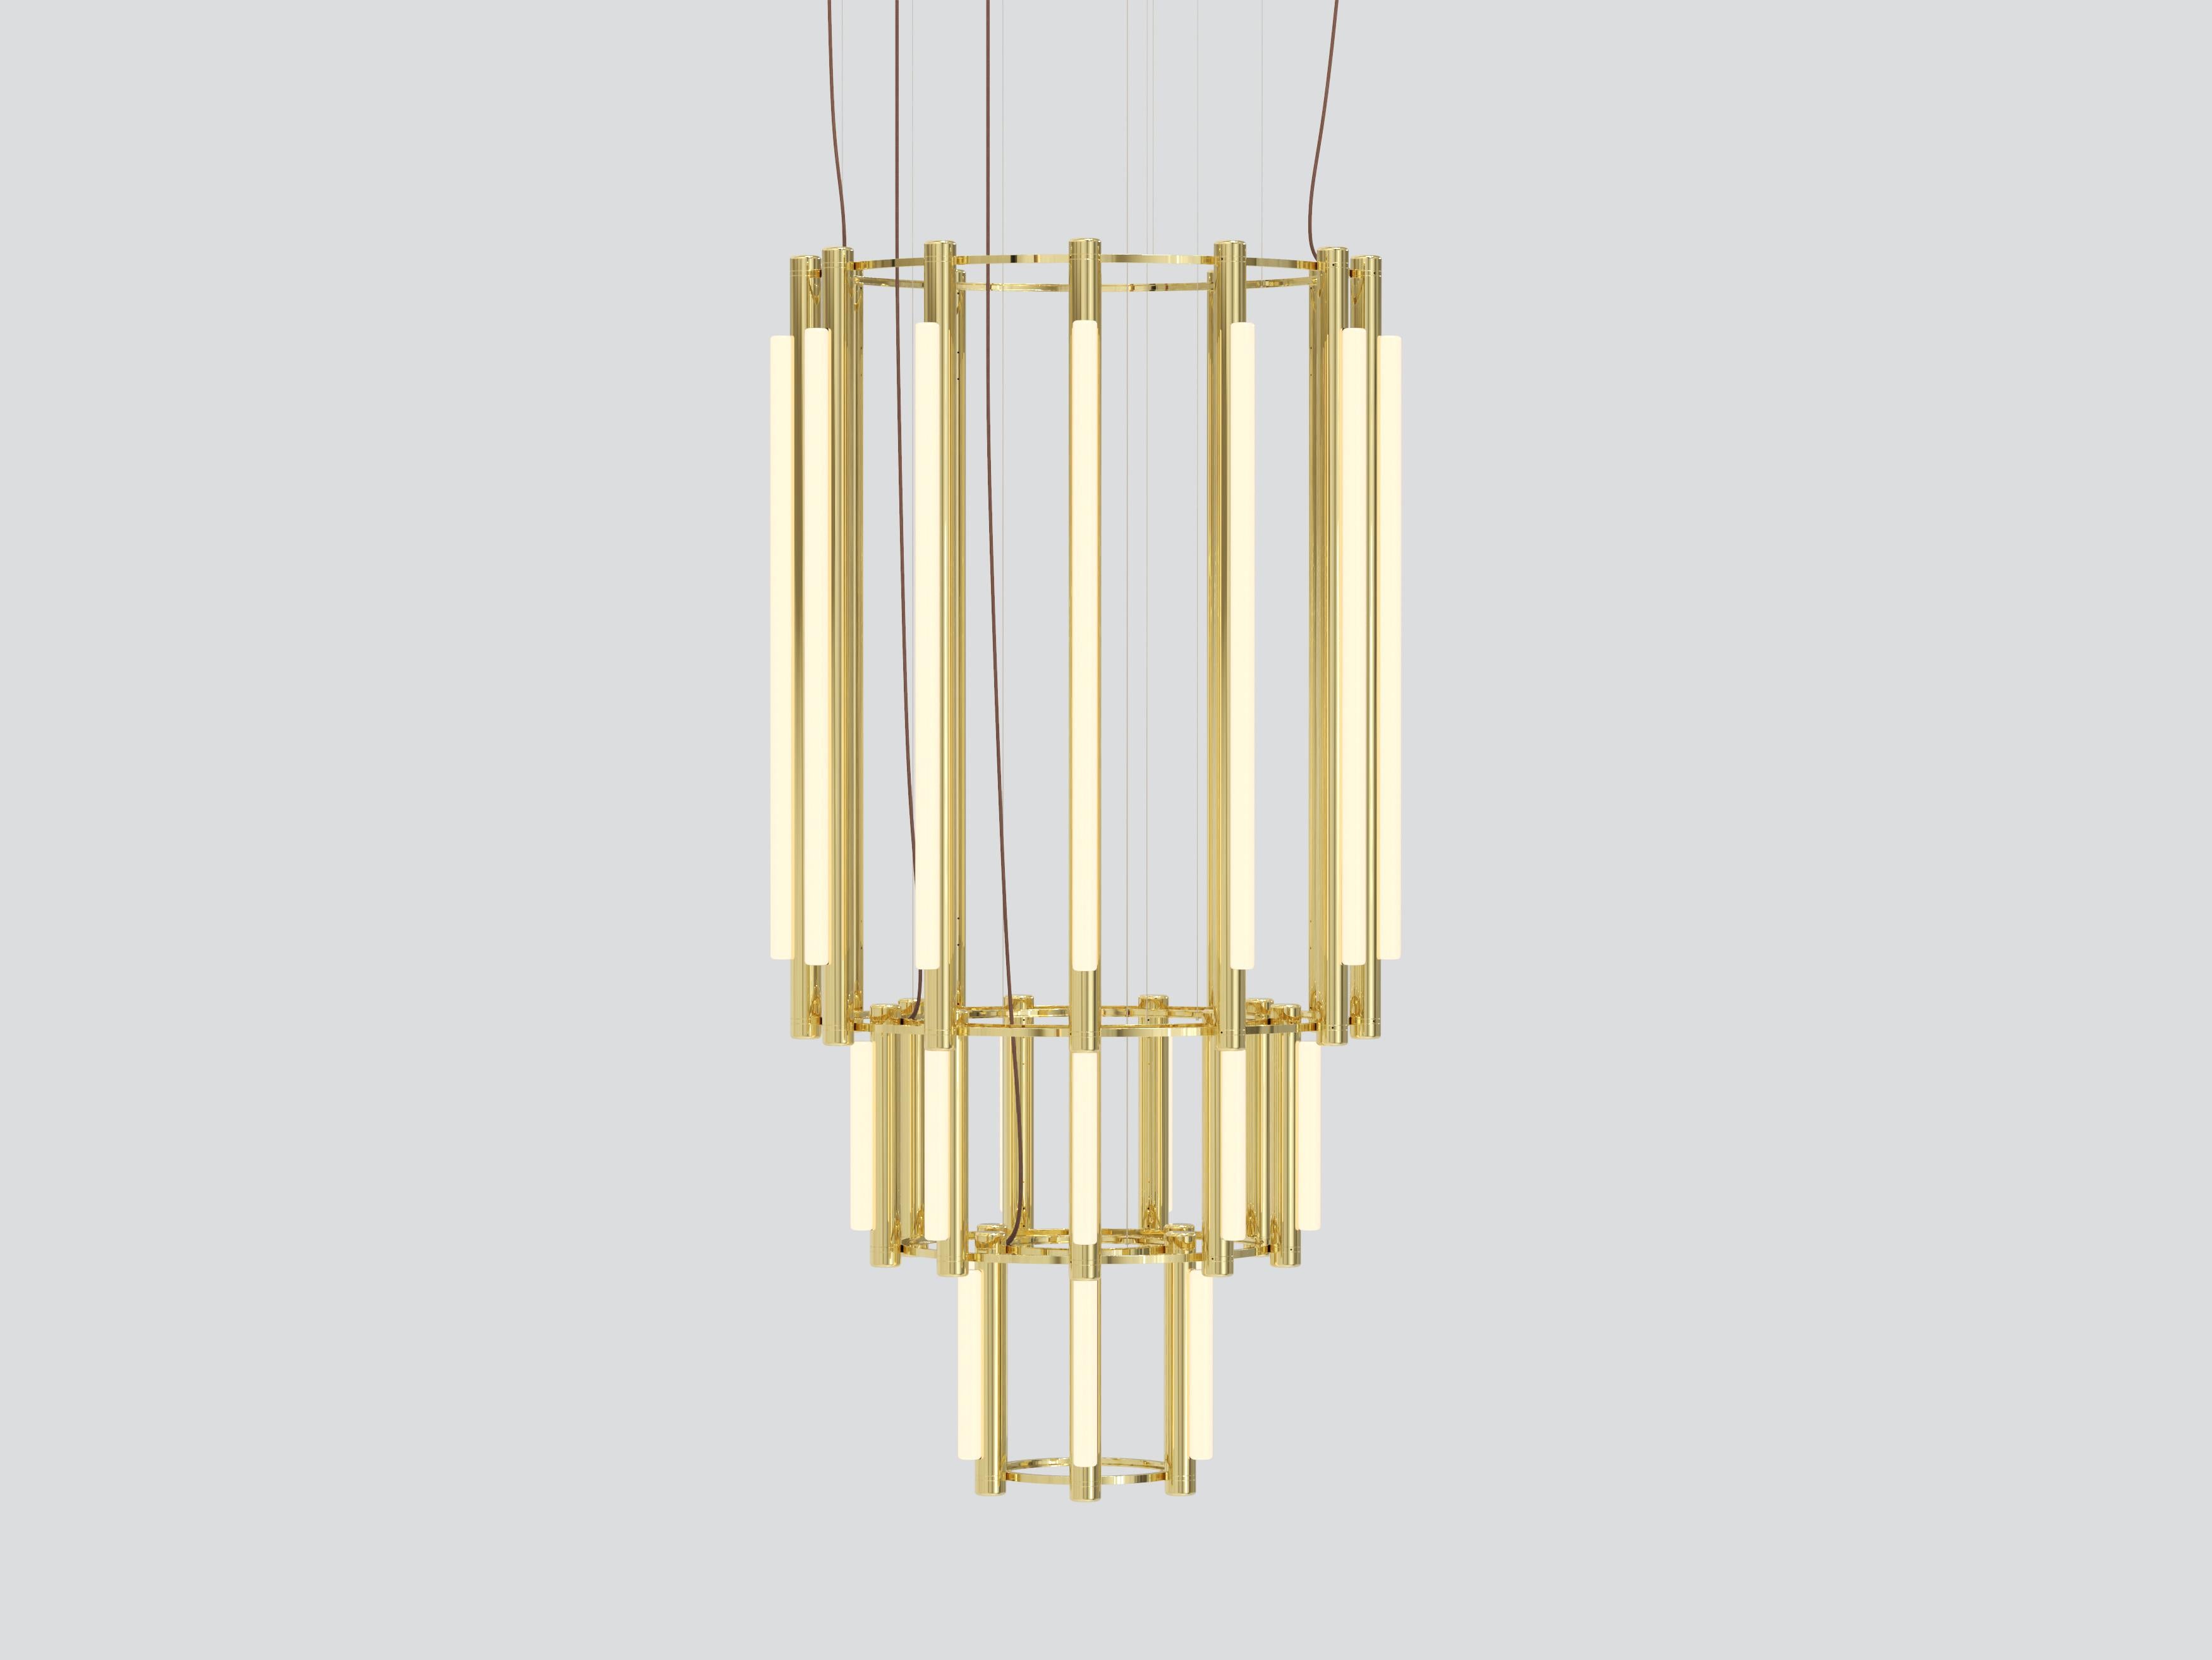 Pipeline Chandelier 11 – Pendant
By Caine Heintzman 

Materials
– Aluminum Body
– Cast Acrylic

Electrical
– 12 x 15W + 15 x 5W LED
– 47,000 hour Lifetime
– 90+ CRI
– Input Voltage 100–240V + 277V
– Integral 24V DC power supply included